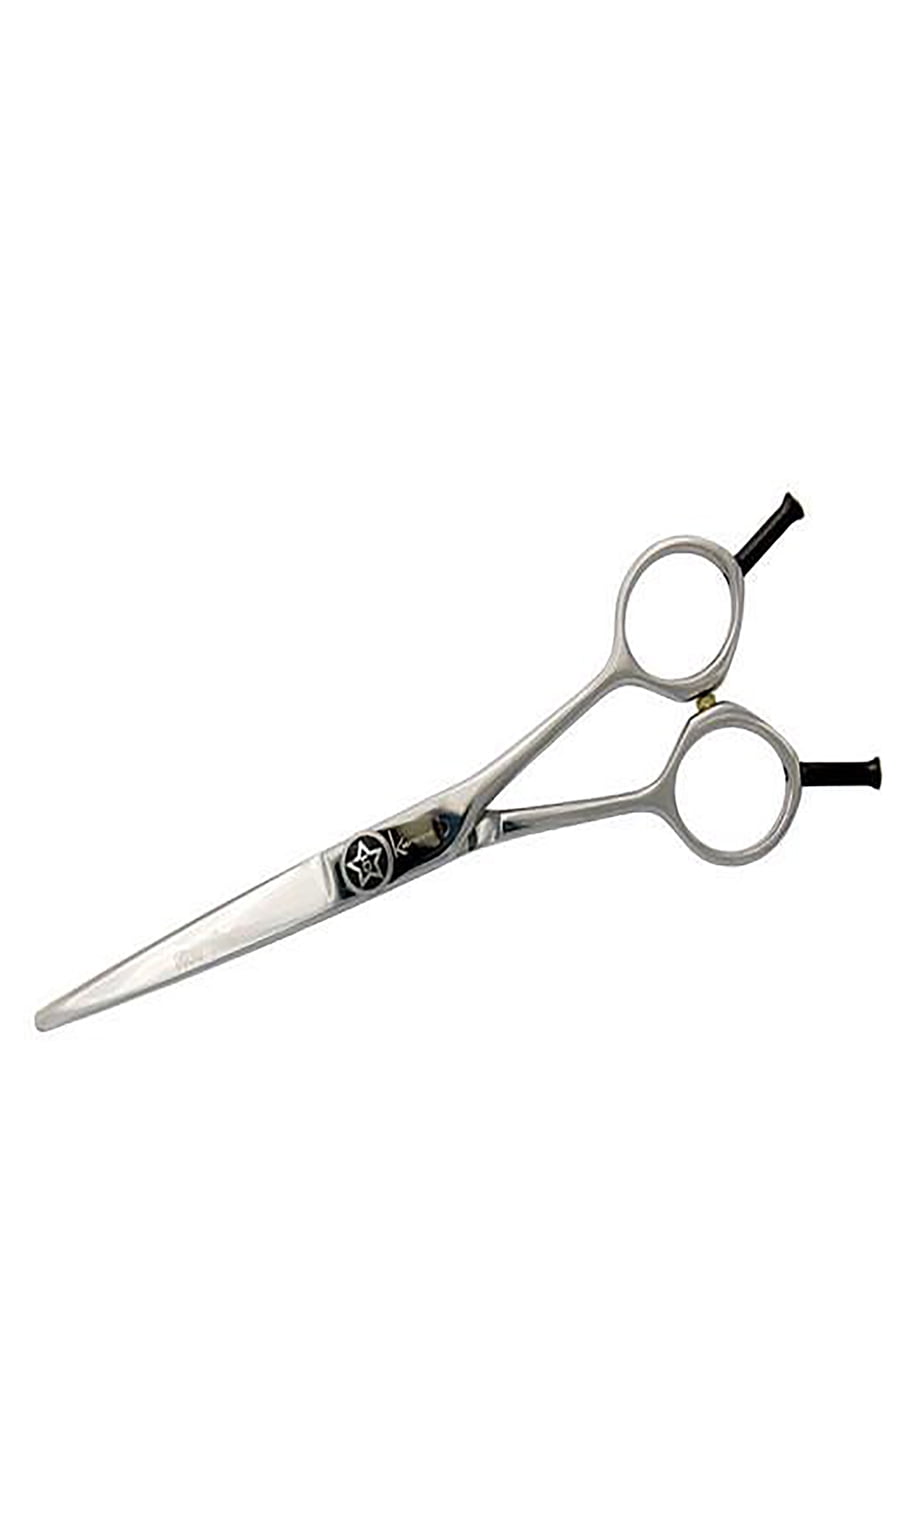 Kenchii Grooming KEFSO46 6 Length Five Star Offset 46 Tooth Thinning Shear